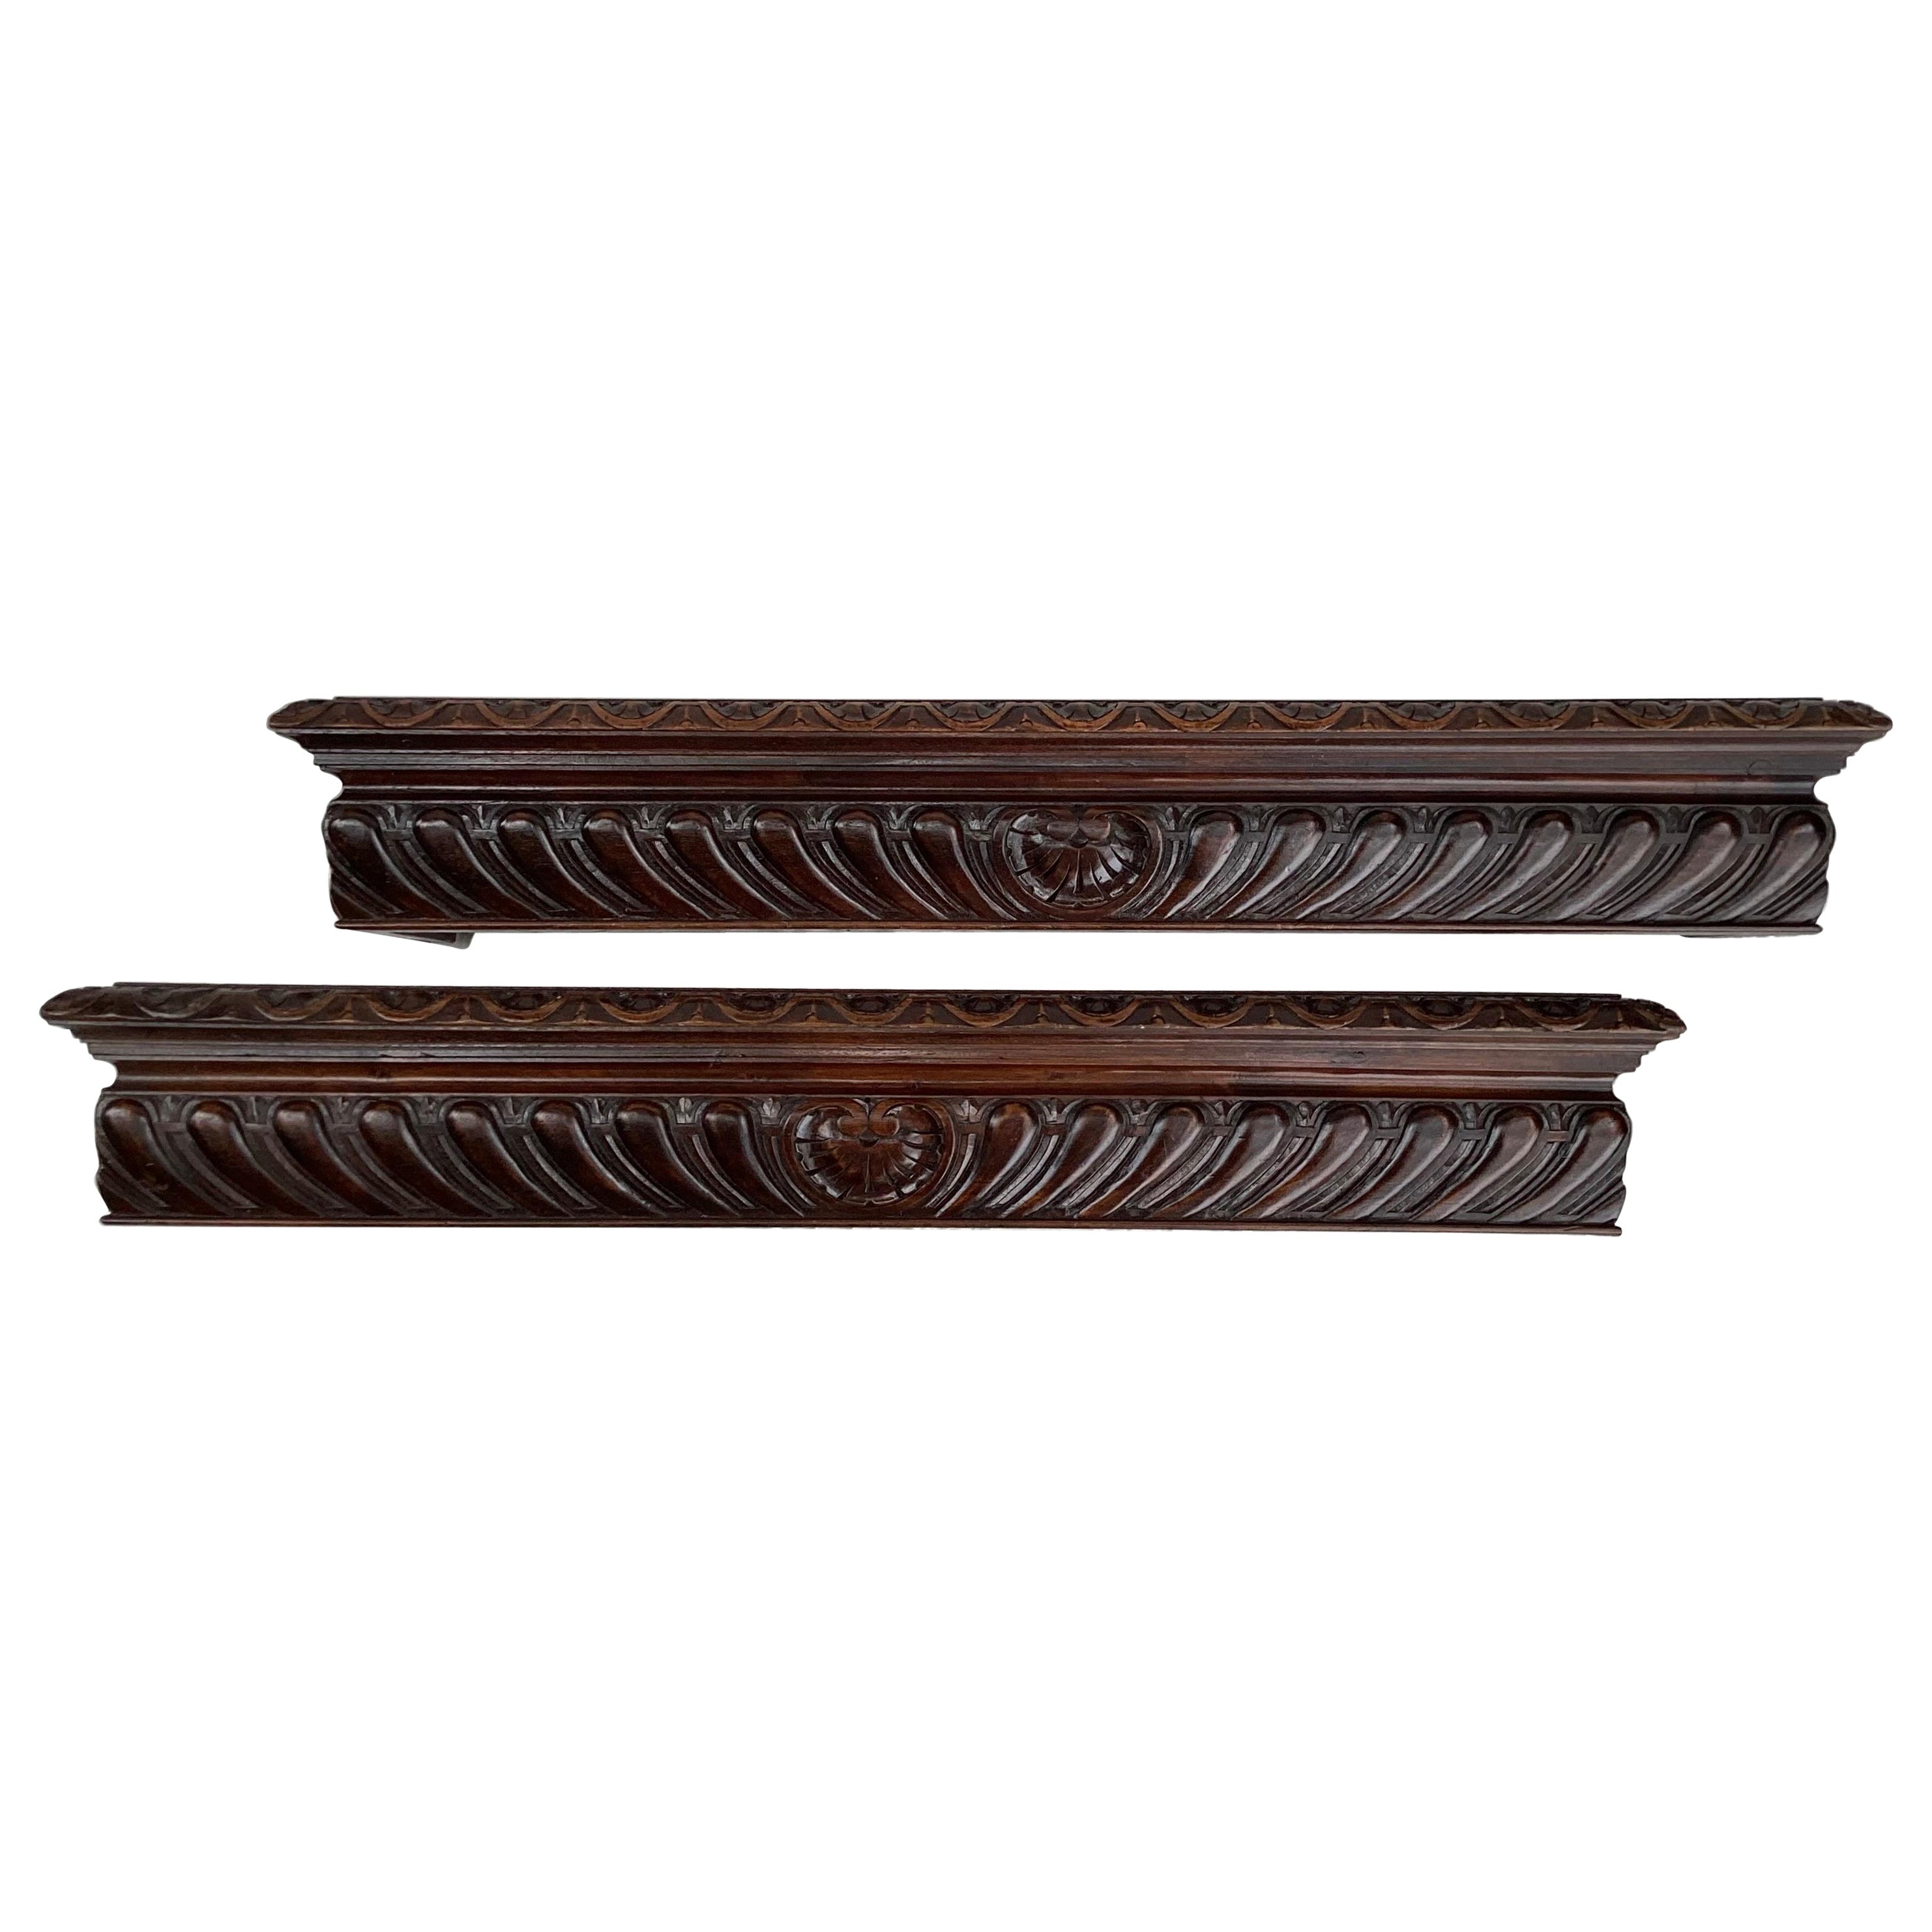 Get Pair of Carved Wood Window Cornices or Window Valances